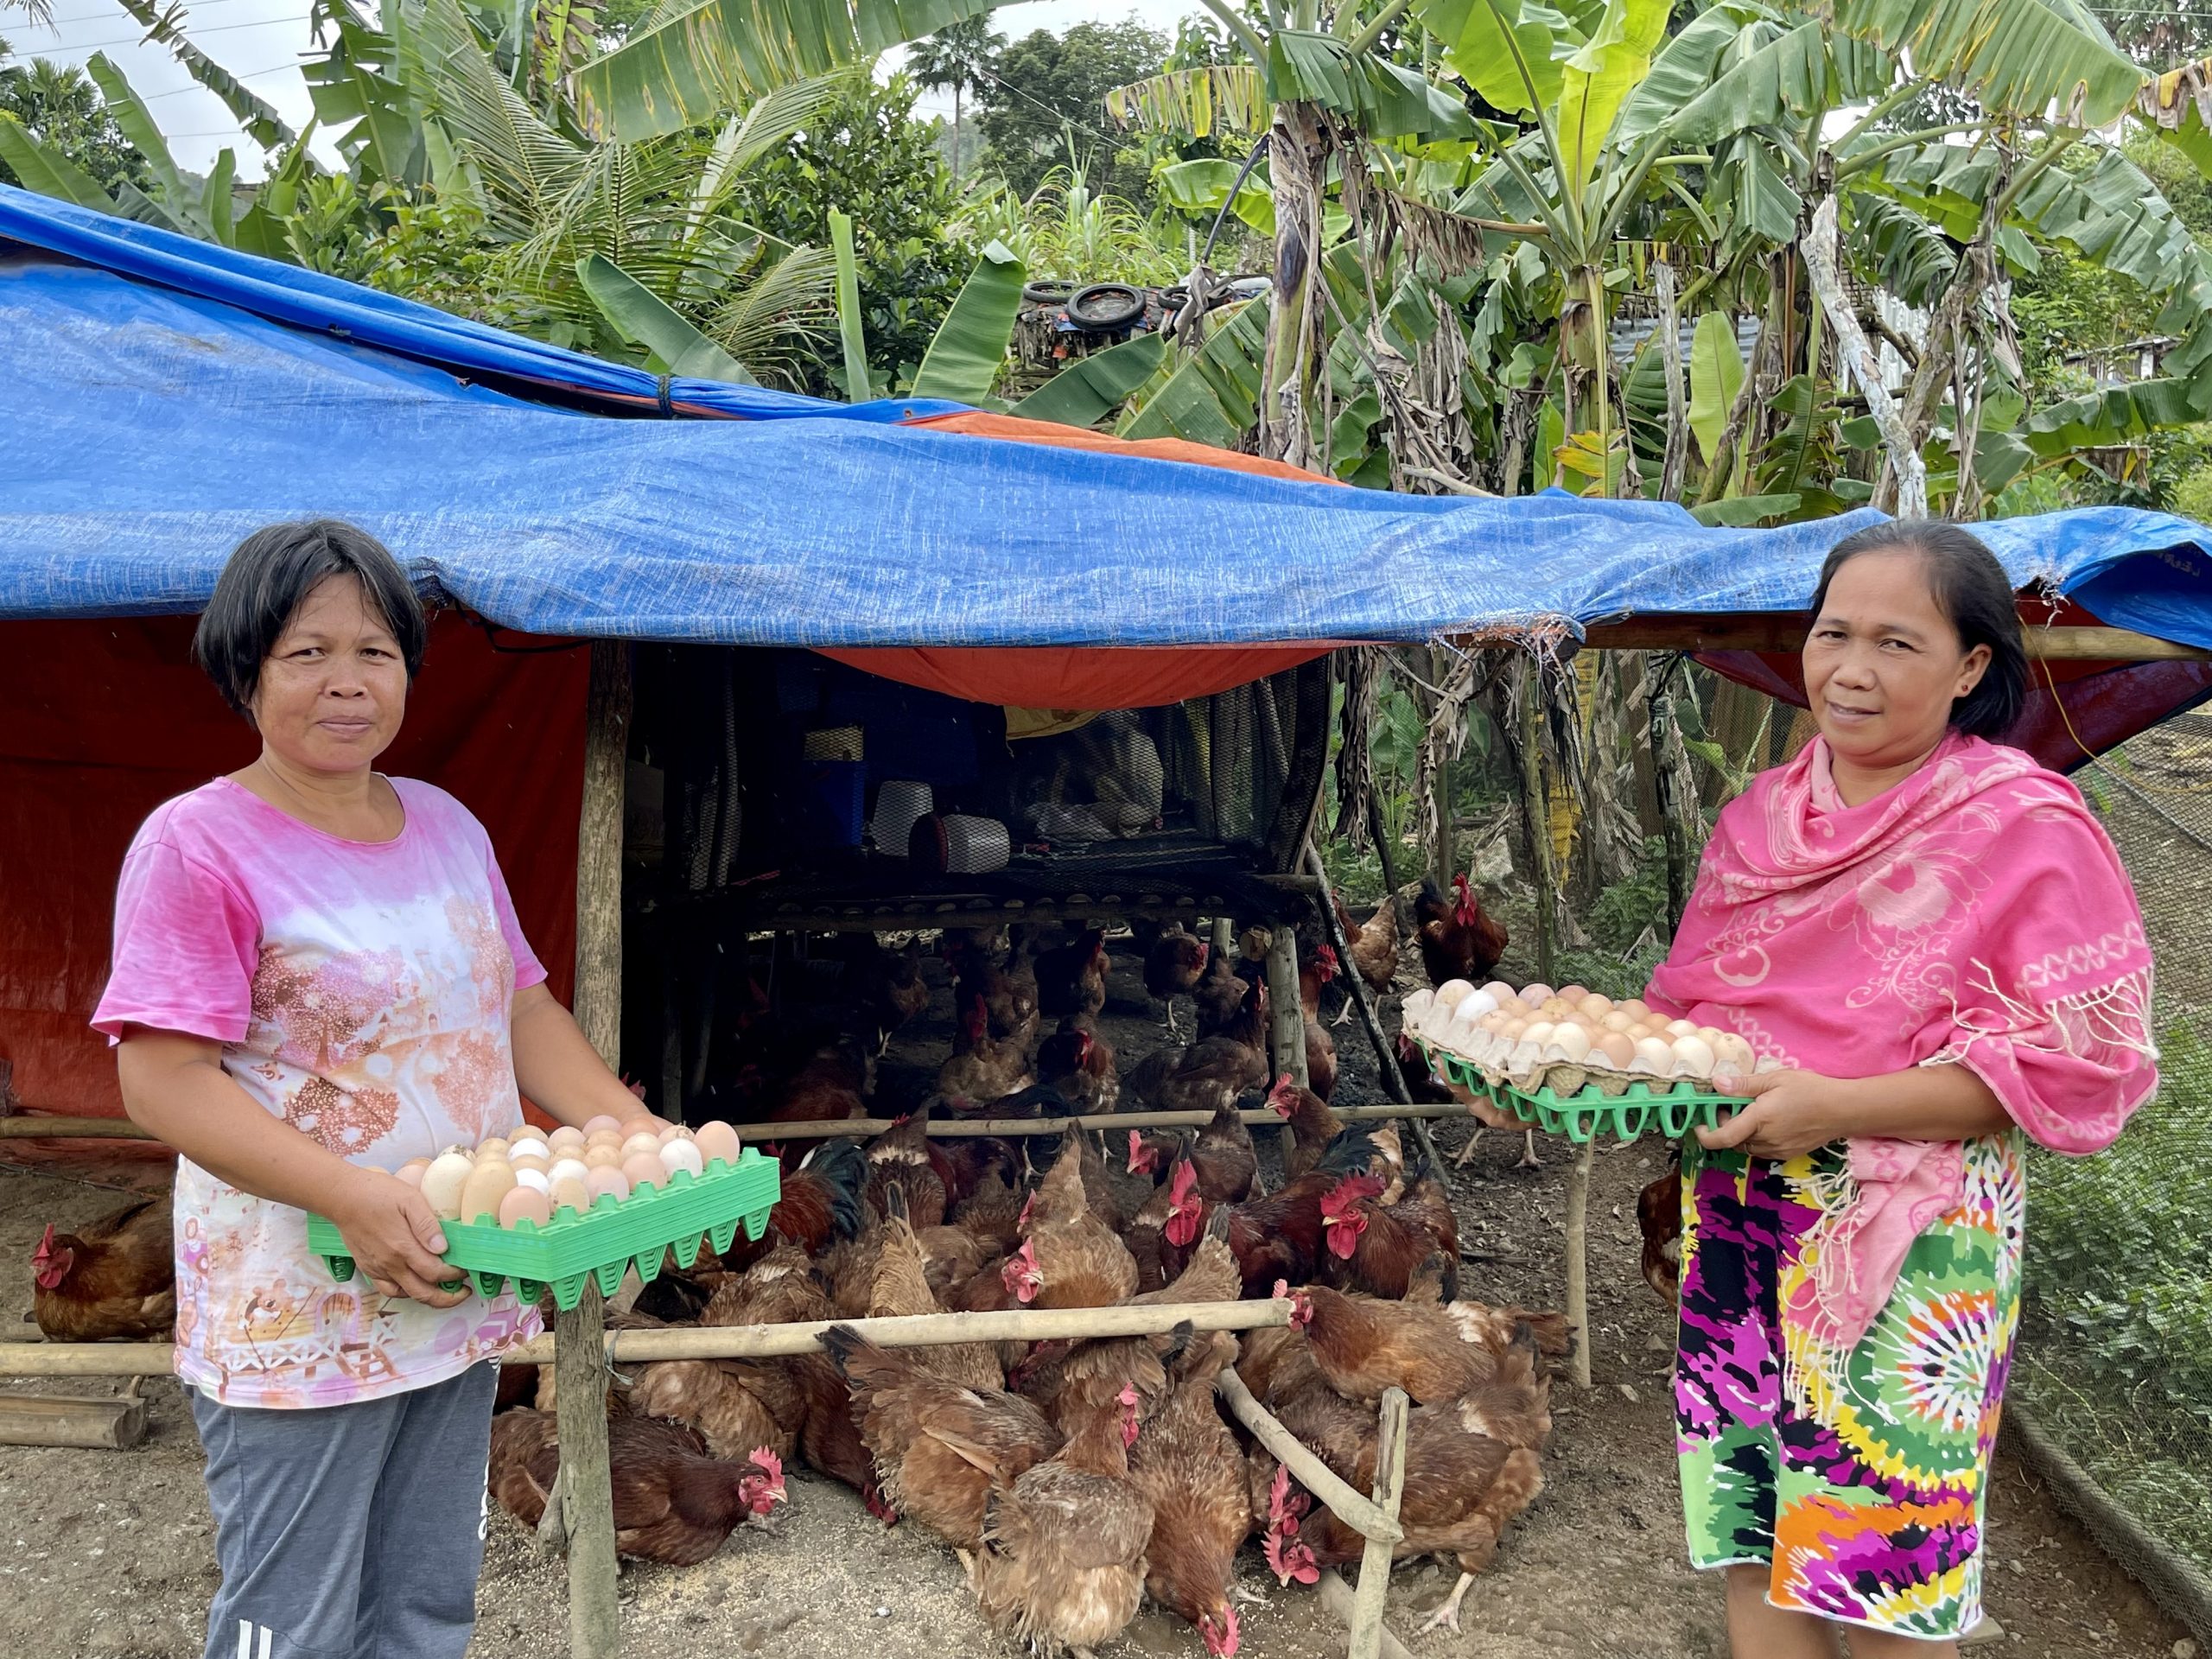 Catanduanes farmers hatch success thru SAAD poultry project